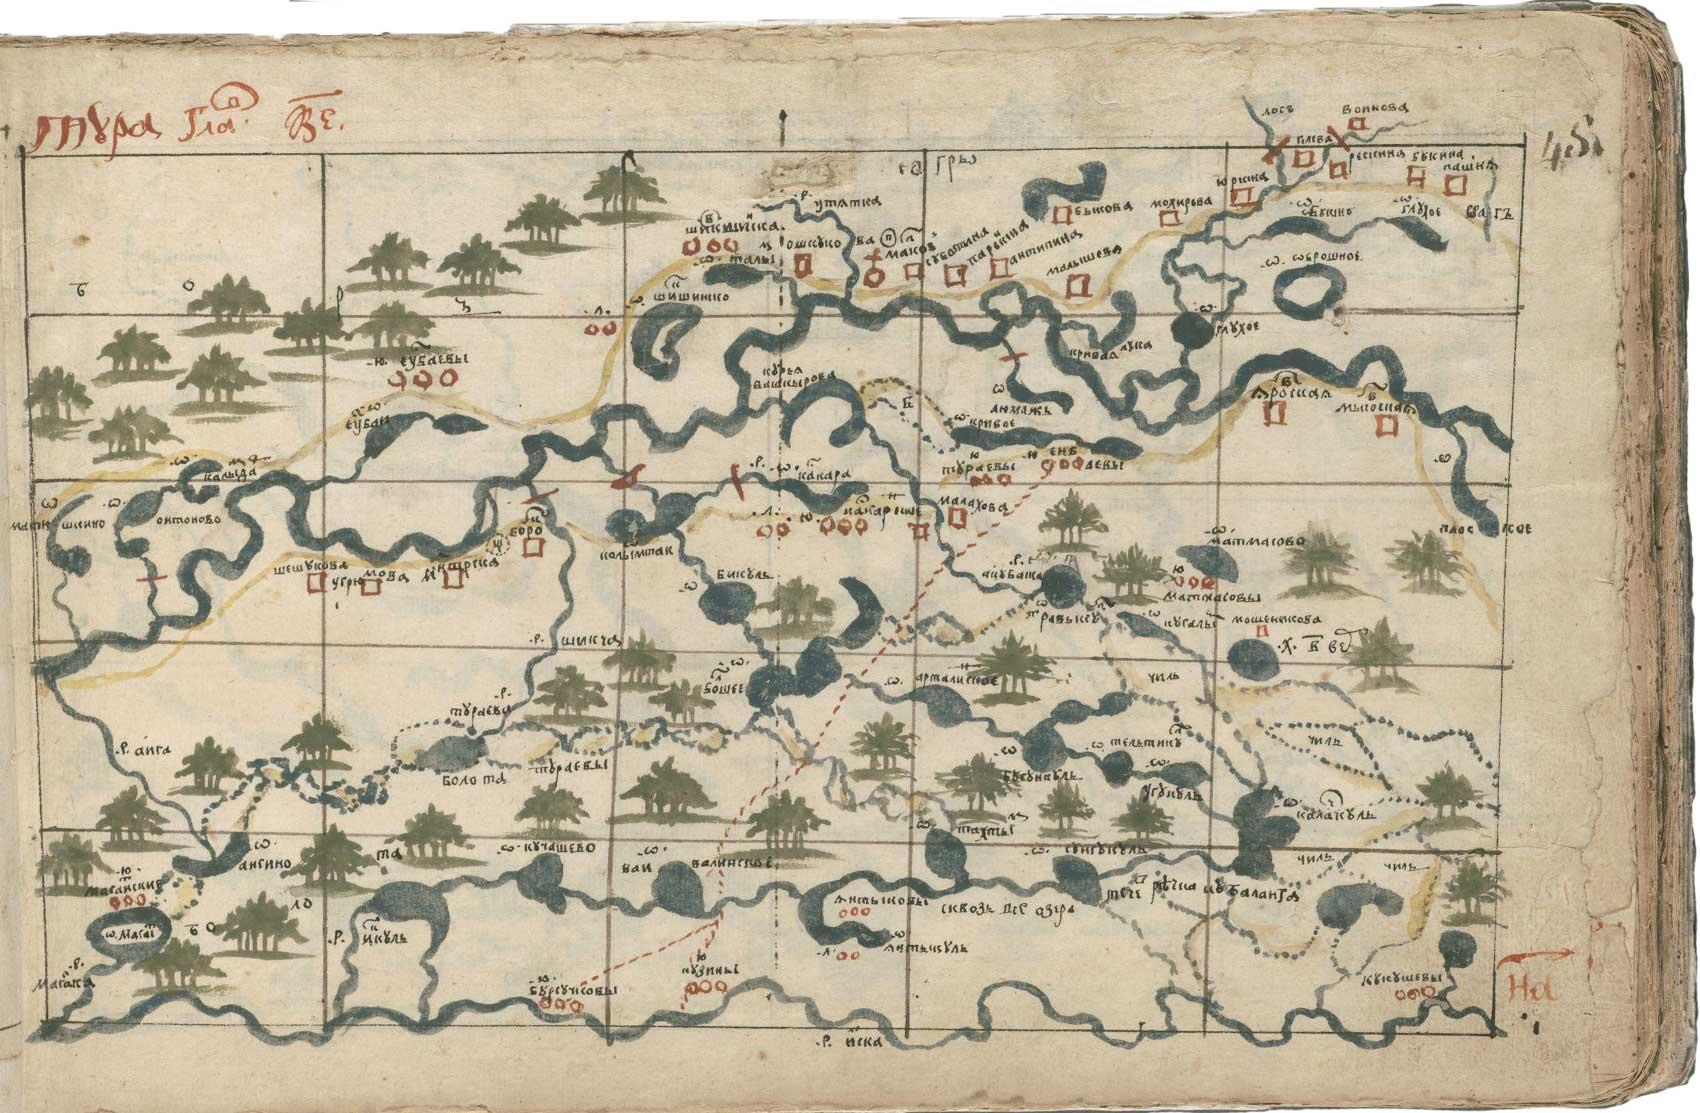 manuscript map showing rivers and forests